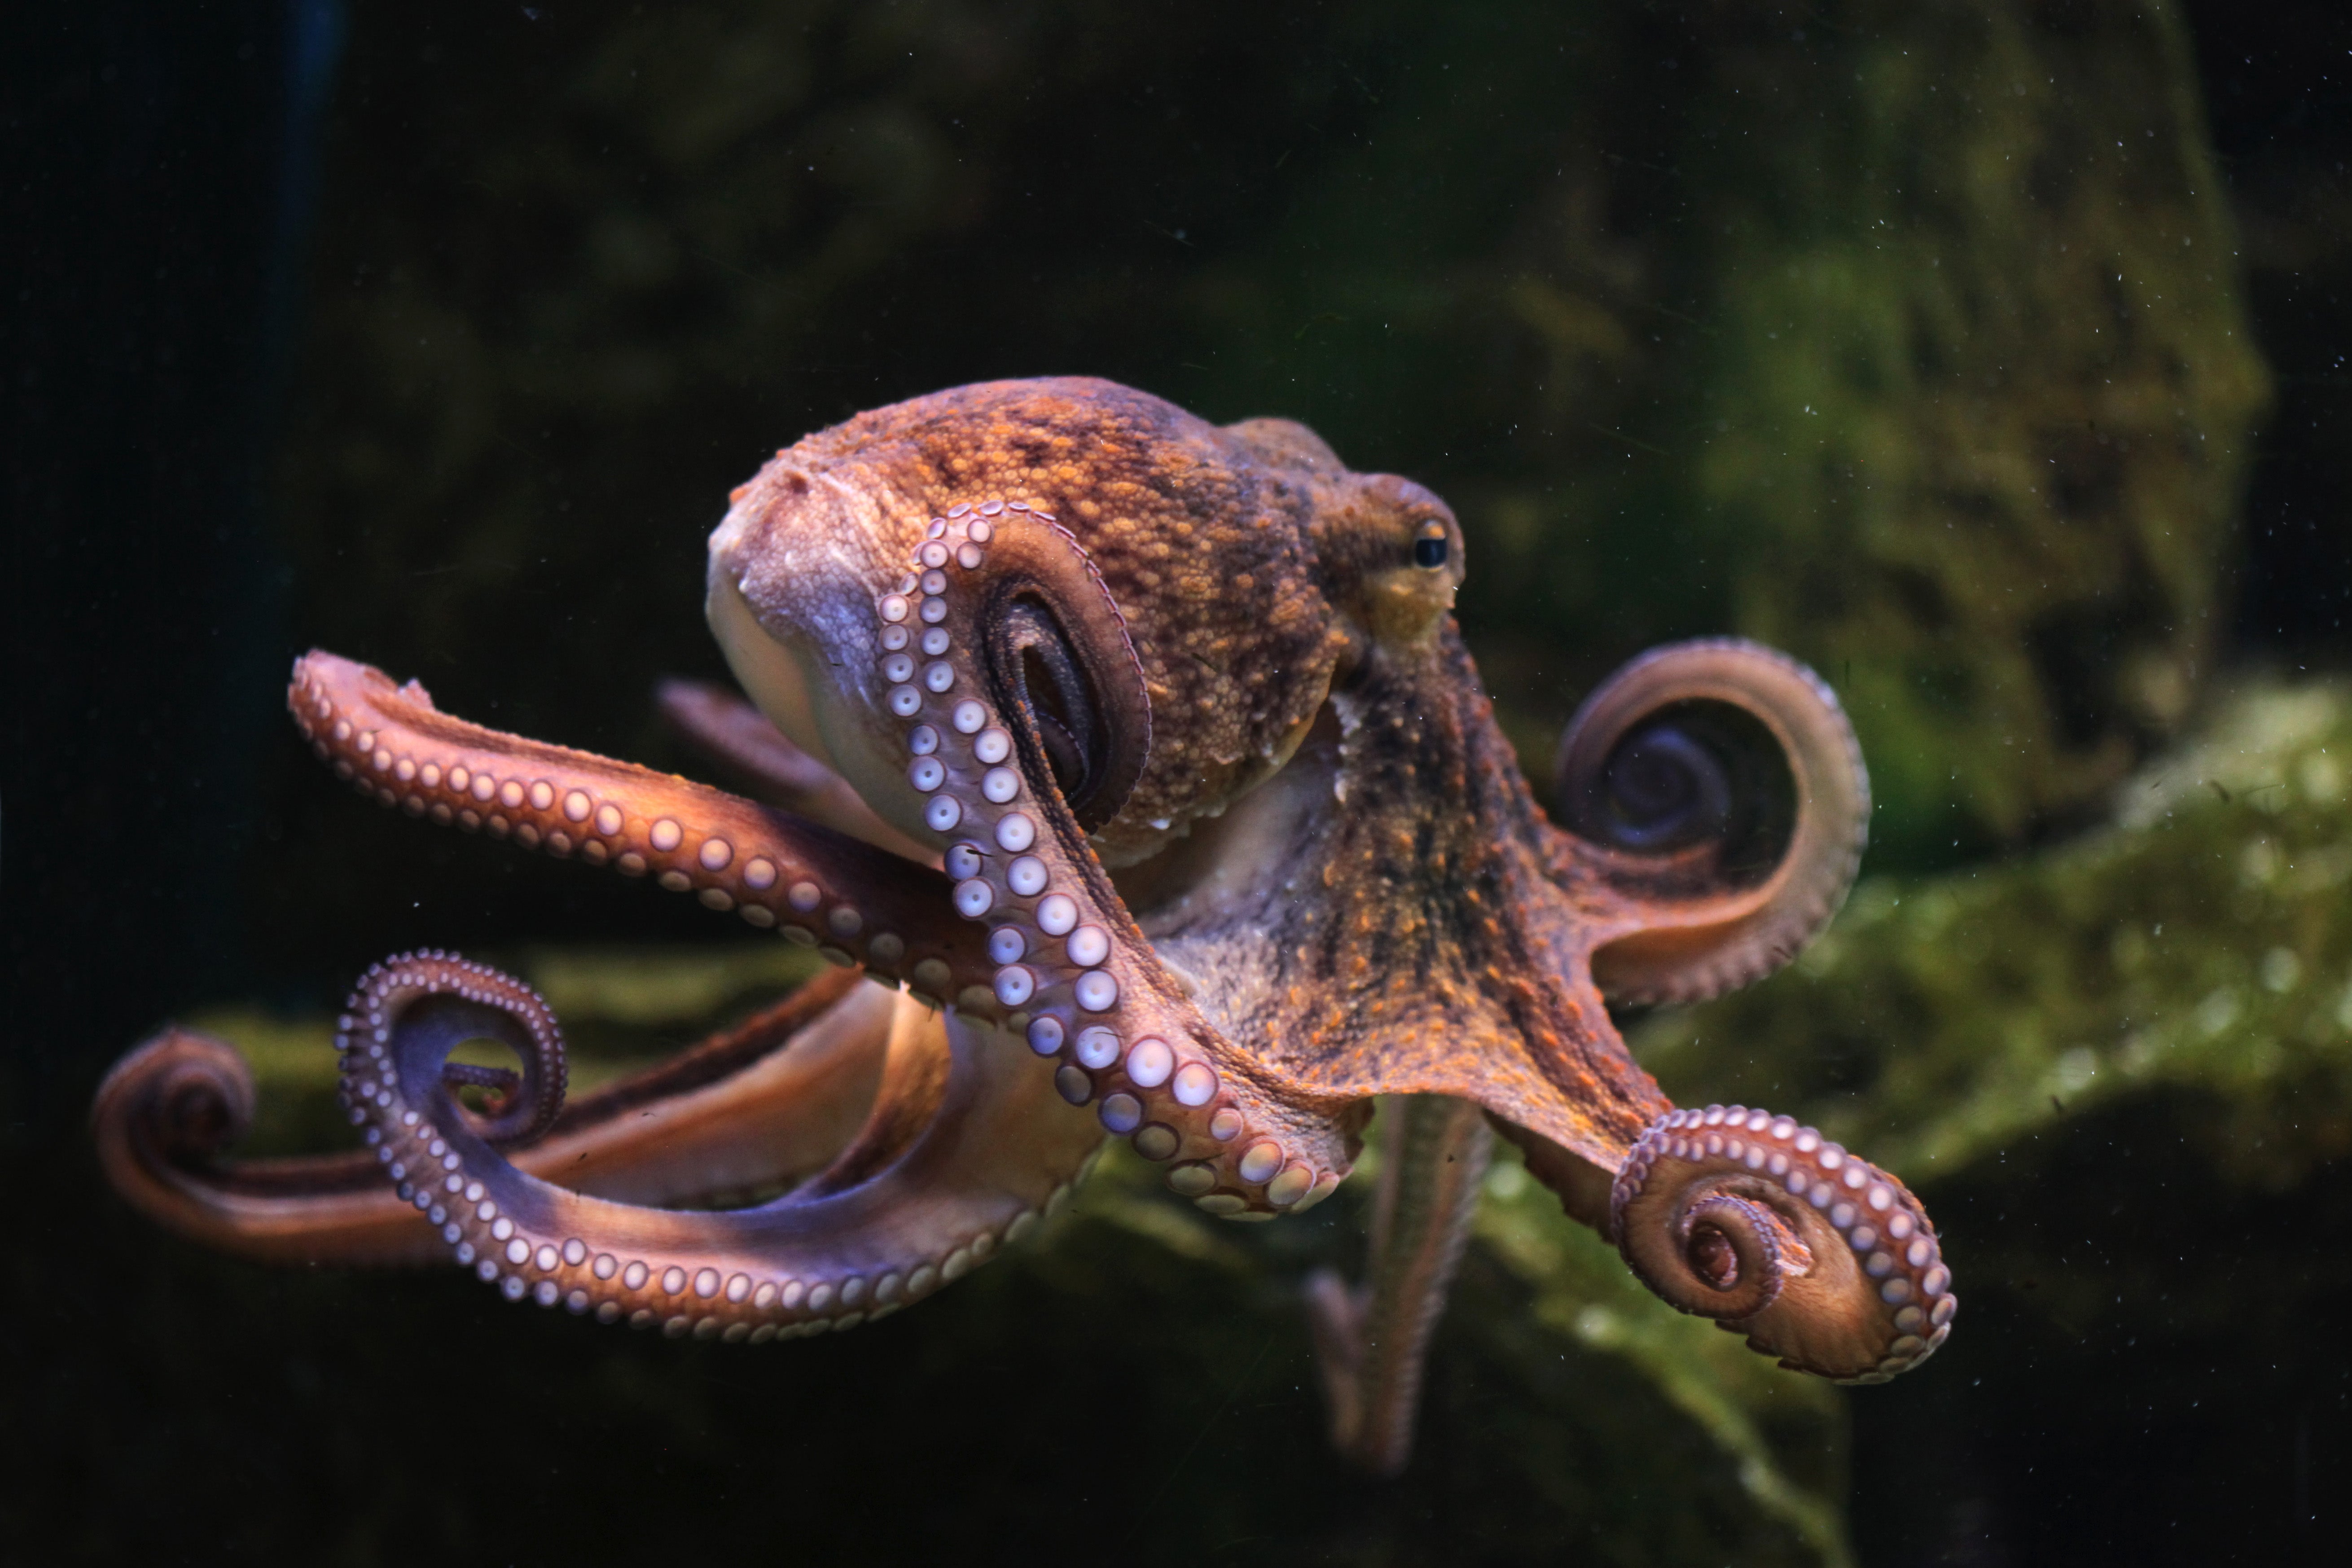 <p>Octopuses which were hit were not observed ‘returning fire’ and throwing back the silt or shells</p>